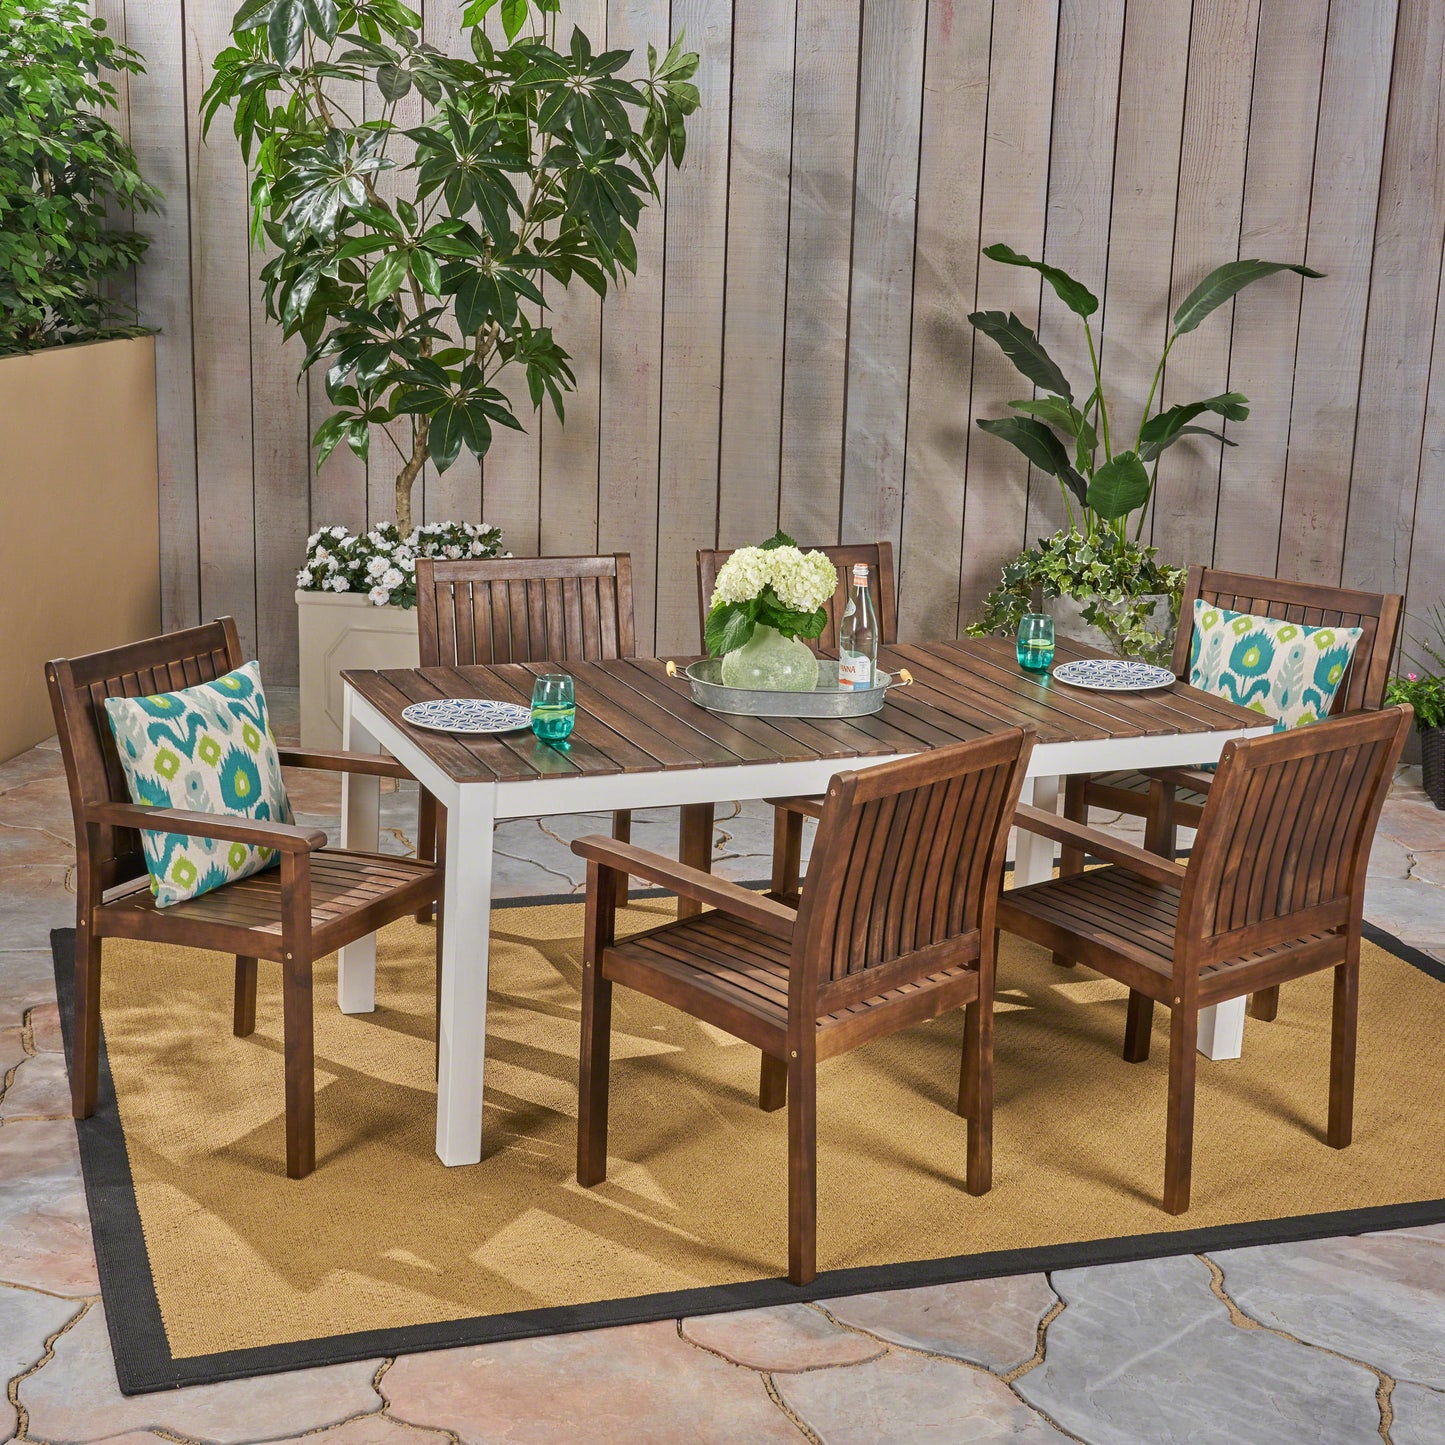 Noe Outdoor 7-Piece Acacia Wood Dining Set, Dark Brown and White